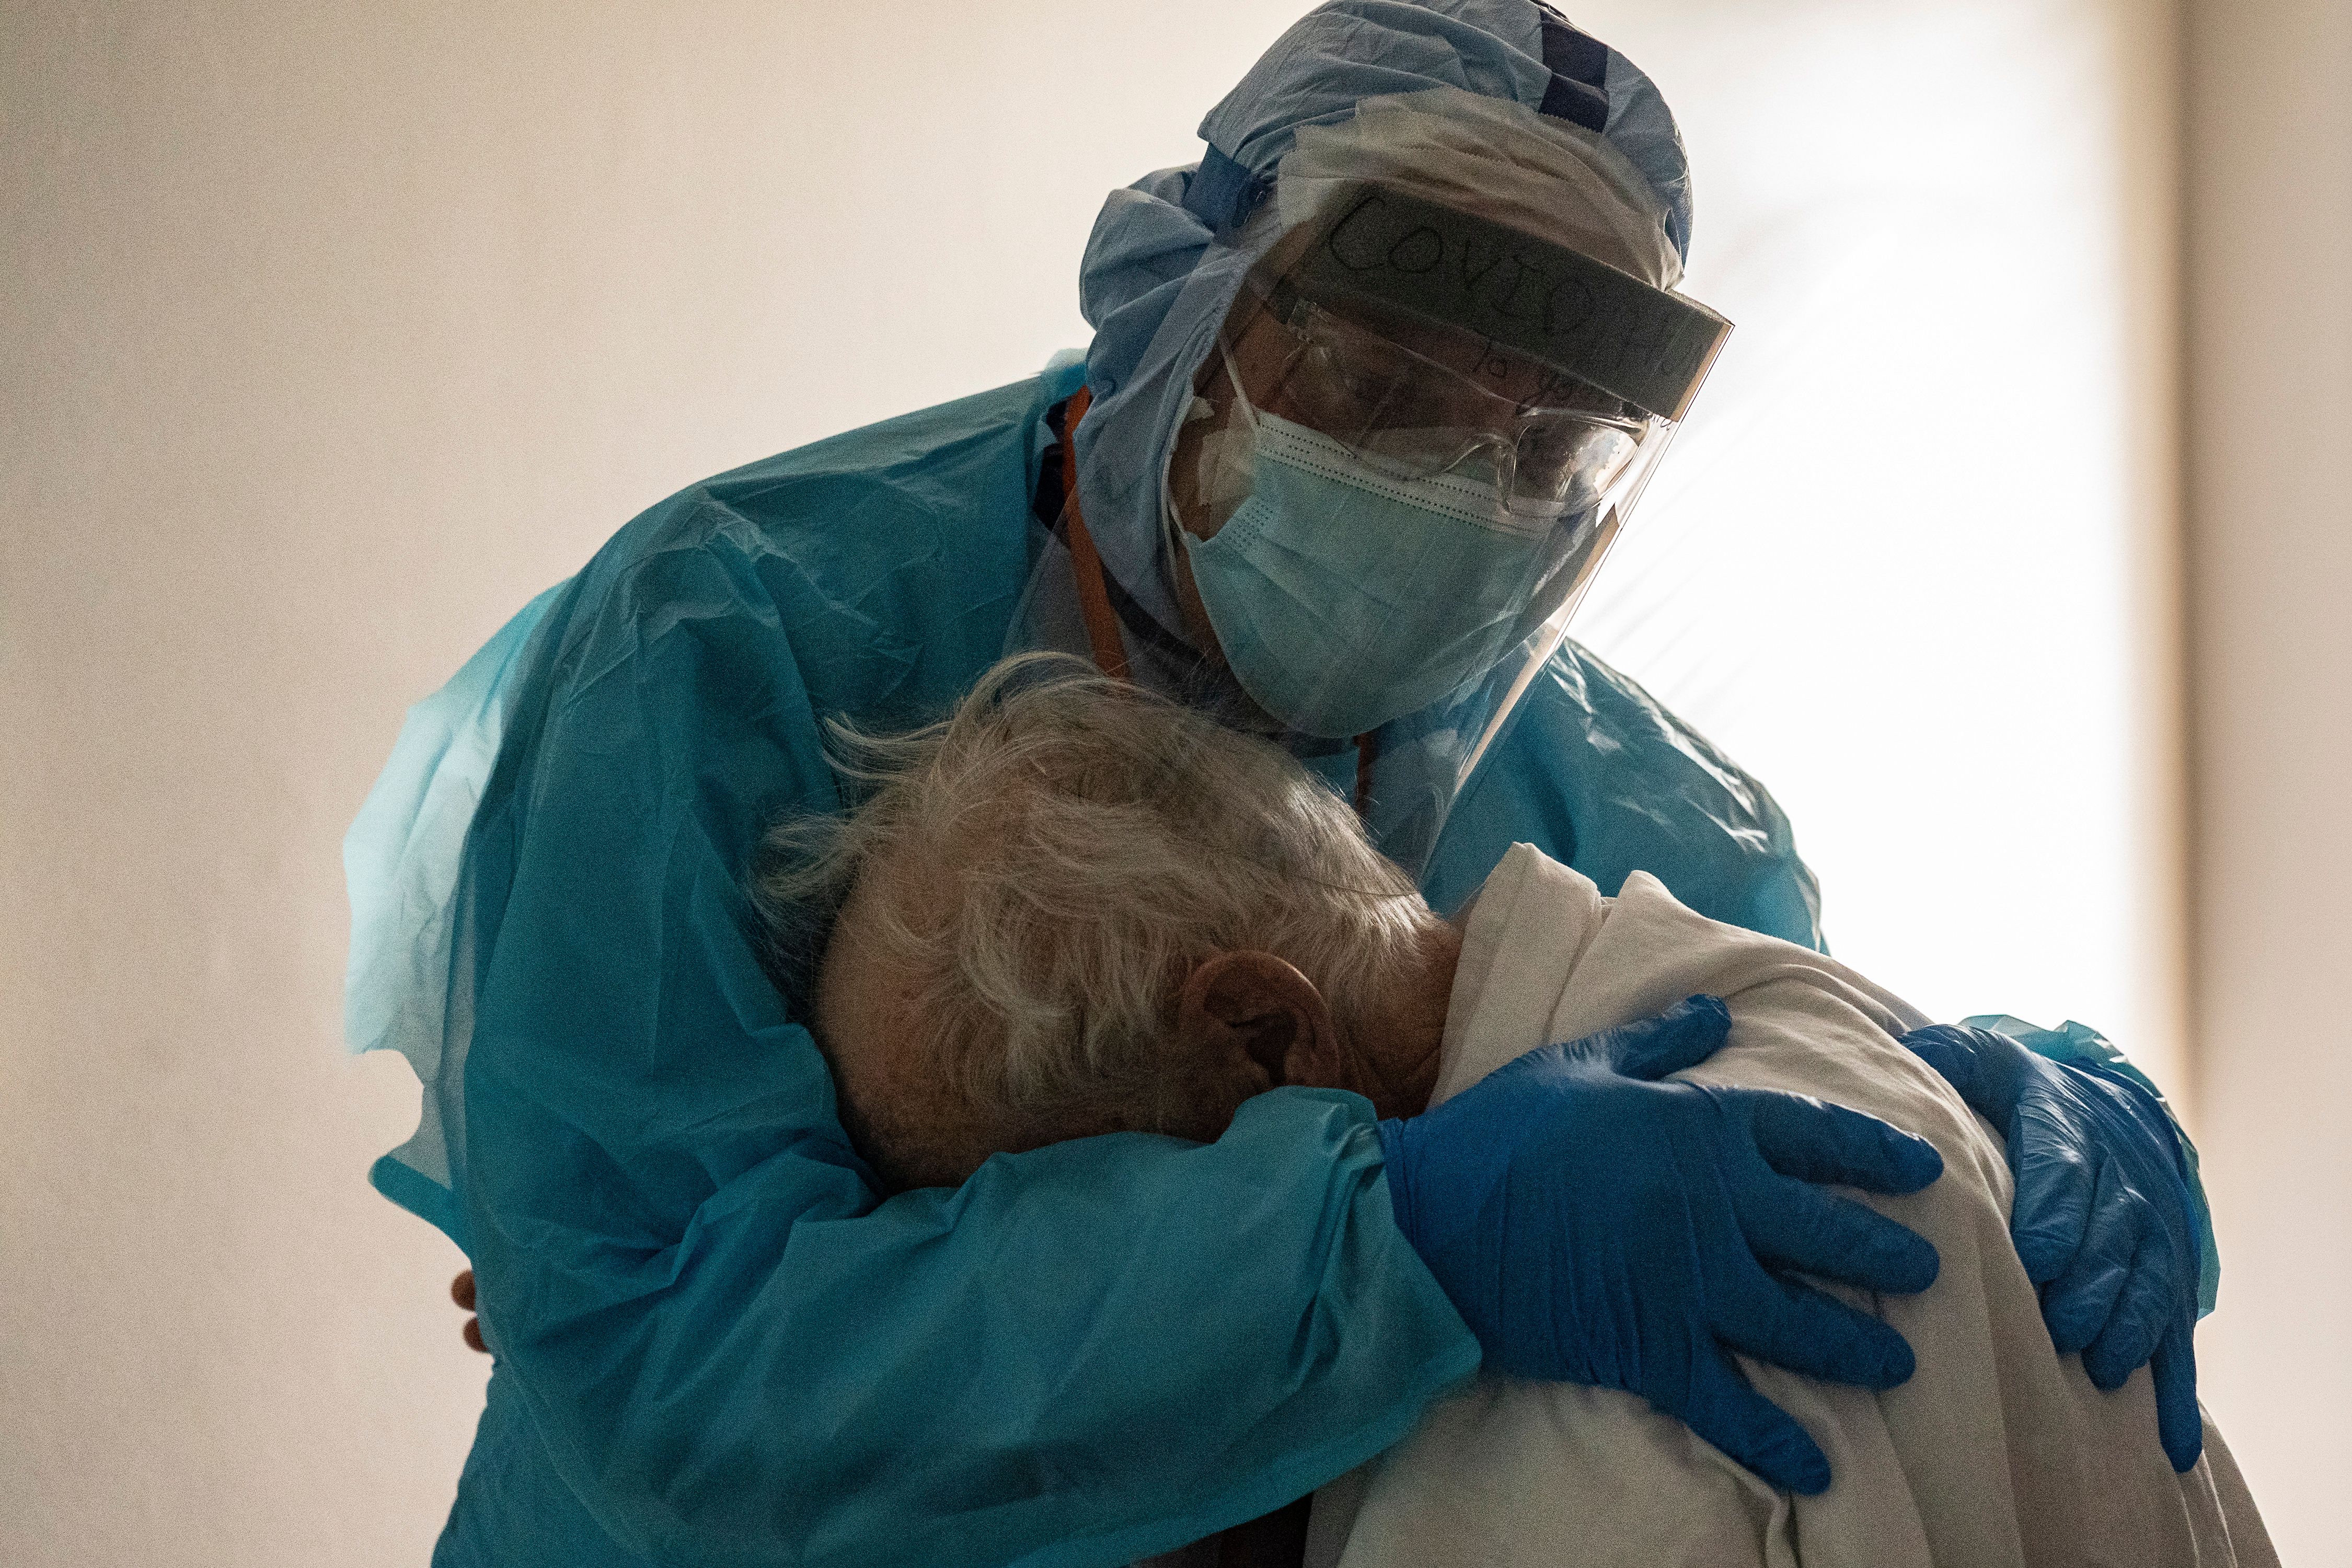 A doctor comforts a COVID-19 patient.